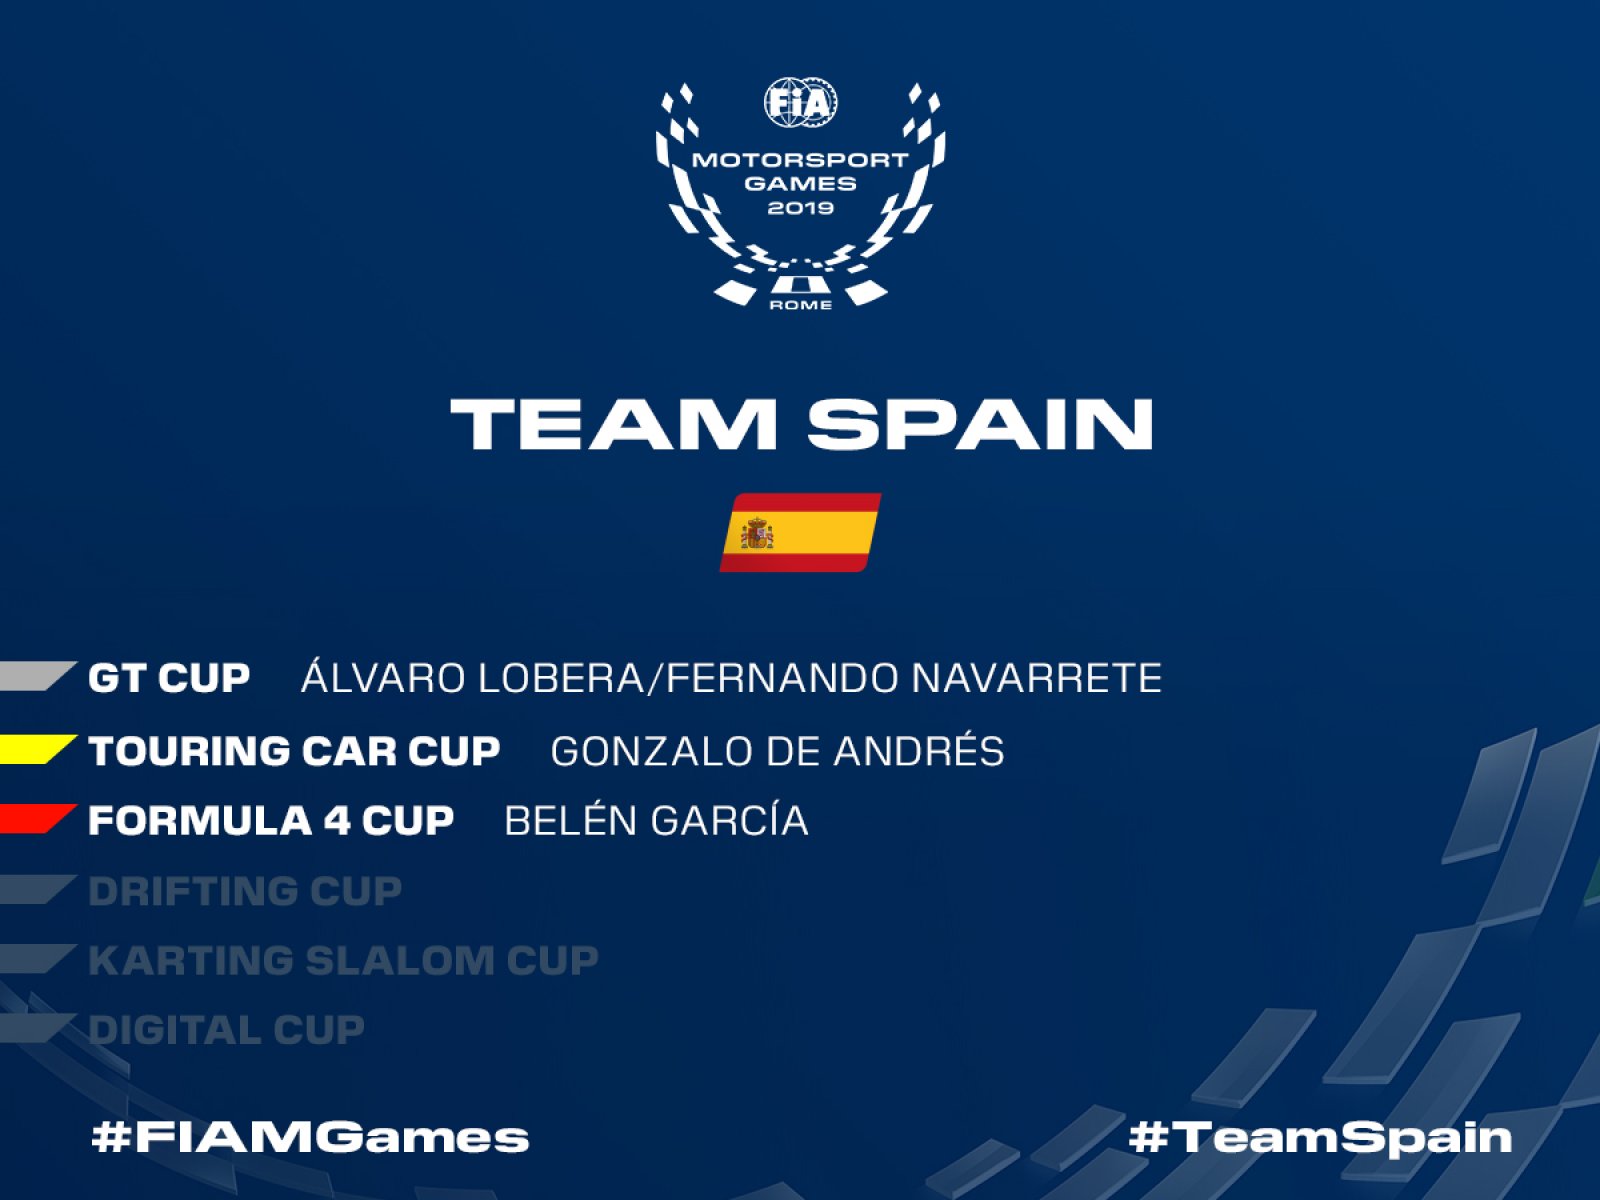 Team Spain becomes latest nation to outline full driver line-up for FIA Motorsport Games